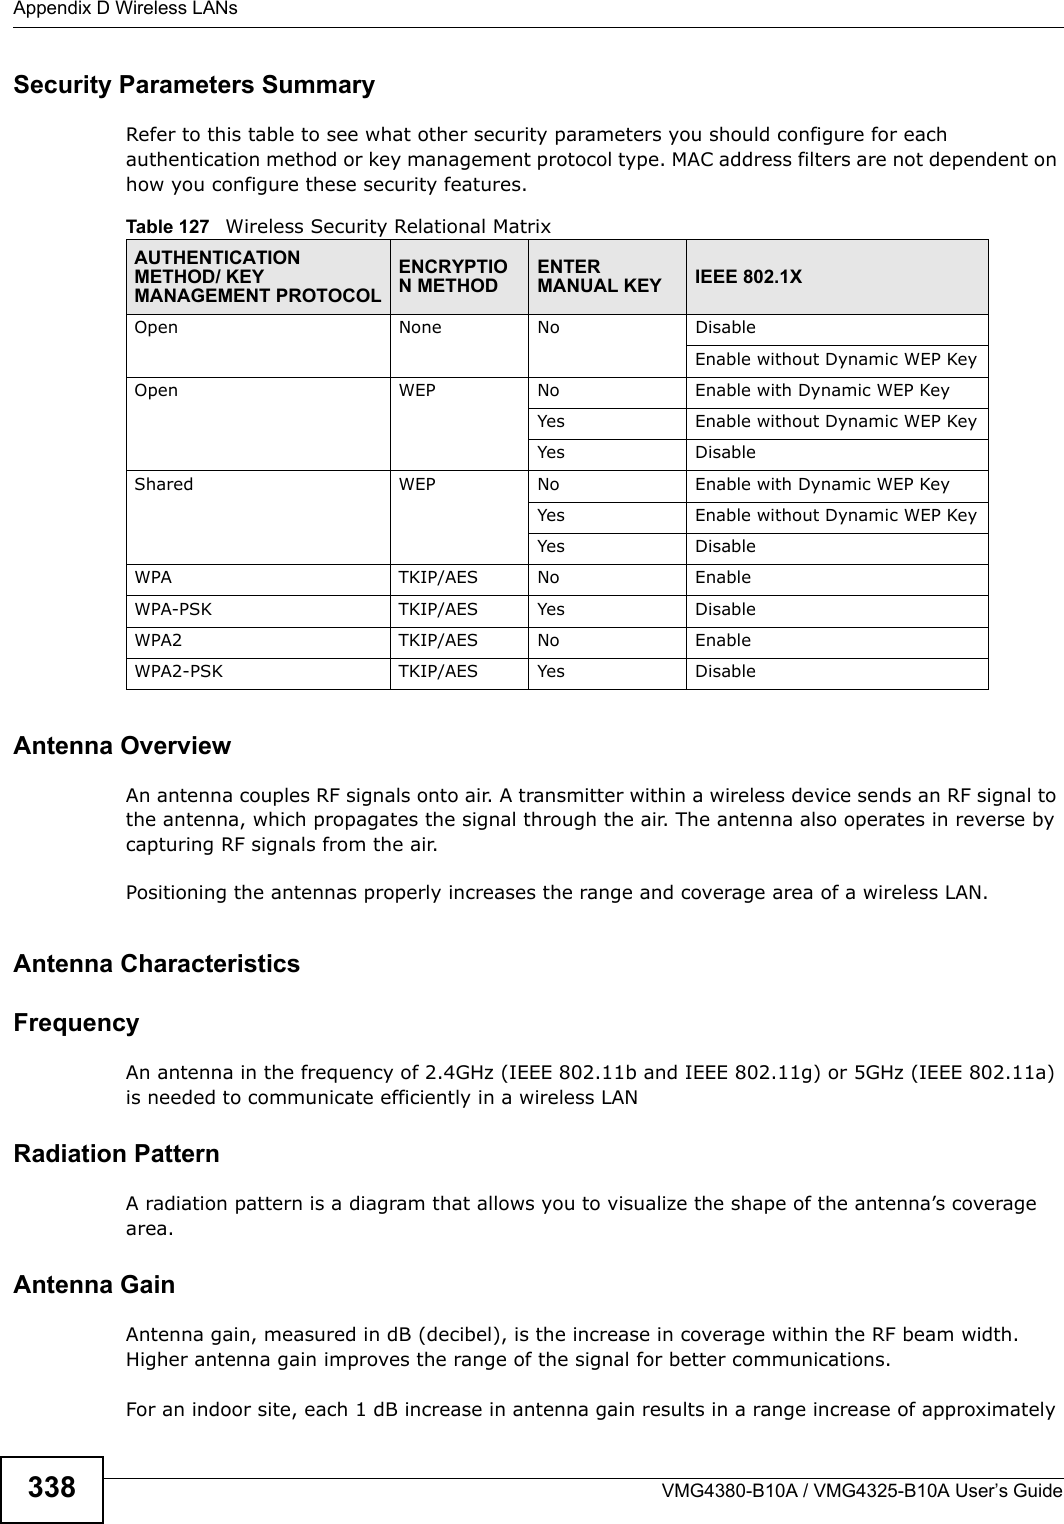 Appendix D Wireless LANsVMG4380-B10A / VMG4325-B10A User’s Guide338Security Parameters SummaryRefer to this table to see what other security parameters you should configure for each authentication method or key management protocol type. MAC address filters are not dependent on how you configure these security features.Antenna OverviewAn antenna couples RF signals onto air. A transmitter within a wireless device sends an RF signal to the antenna, which propagates the signal through the air. The antenna also operates in reverse by capturing RF signals from the air.Positioning the antennas properly increases the range and coverage area of a wireless LAN. Antenna CharacteristicsFrequencyAn antenna in the frequency of 2.4GHz (IEEE 802.11b and IEEE 802.11g) or 5GHz (IEEE 802.11a) is needed to communicate efficiently in a wireless LANRadiation PatternA radiation pattern is a diagram that allows you to visualize the shape of the antenna’s coverage area. Antenna GainAntenna gain, measured in dB (decibel), is the increase in coverage within the RF beam width. Higher antenna gain improves the range of the signal for better communications. For an indoor site, each 1 dB increase in antenna gain results in a range increase of approximately Table 127 Wireless Security Relational MatrixAUTHENTICATION METHOD/ KEY MANAGEMENT PROTOCOLENCRYPTION METHODENTER MANUAL KEY IEEE 802.1XOpen None No DisableEnable without Dynamic WEP KeyOpen WEP No           Enable with Dynamic WEP KeyYes Enable without Dynamic WEP KeyYes DisableShared WEP  No           Enable with Dynamic WEP KeyYes Enable without Dynamic WEP KeyYes DisableWPA  TKIP/AES No EnableWPA-PSK  TKIP/AES Yes DisableWPA2 TKIP/AES No EnableWPA2-PSK  TKIP/AES Yes Disable